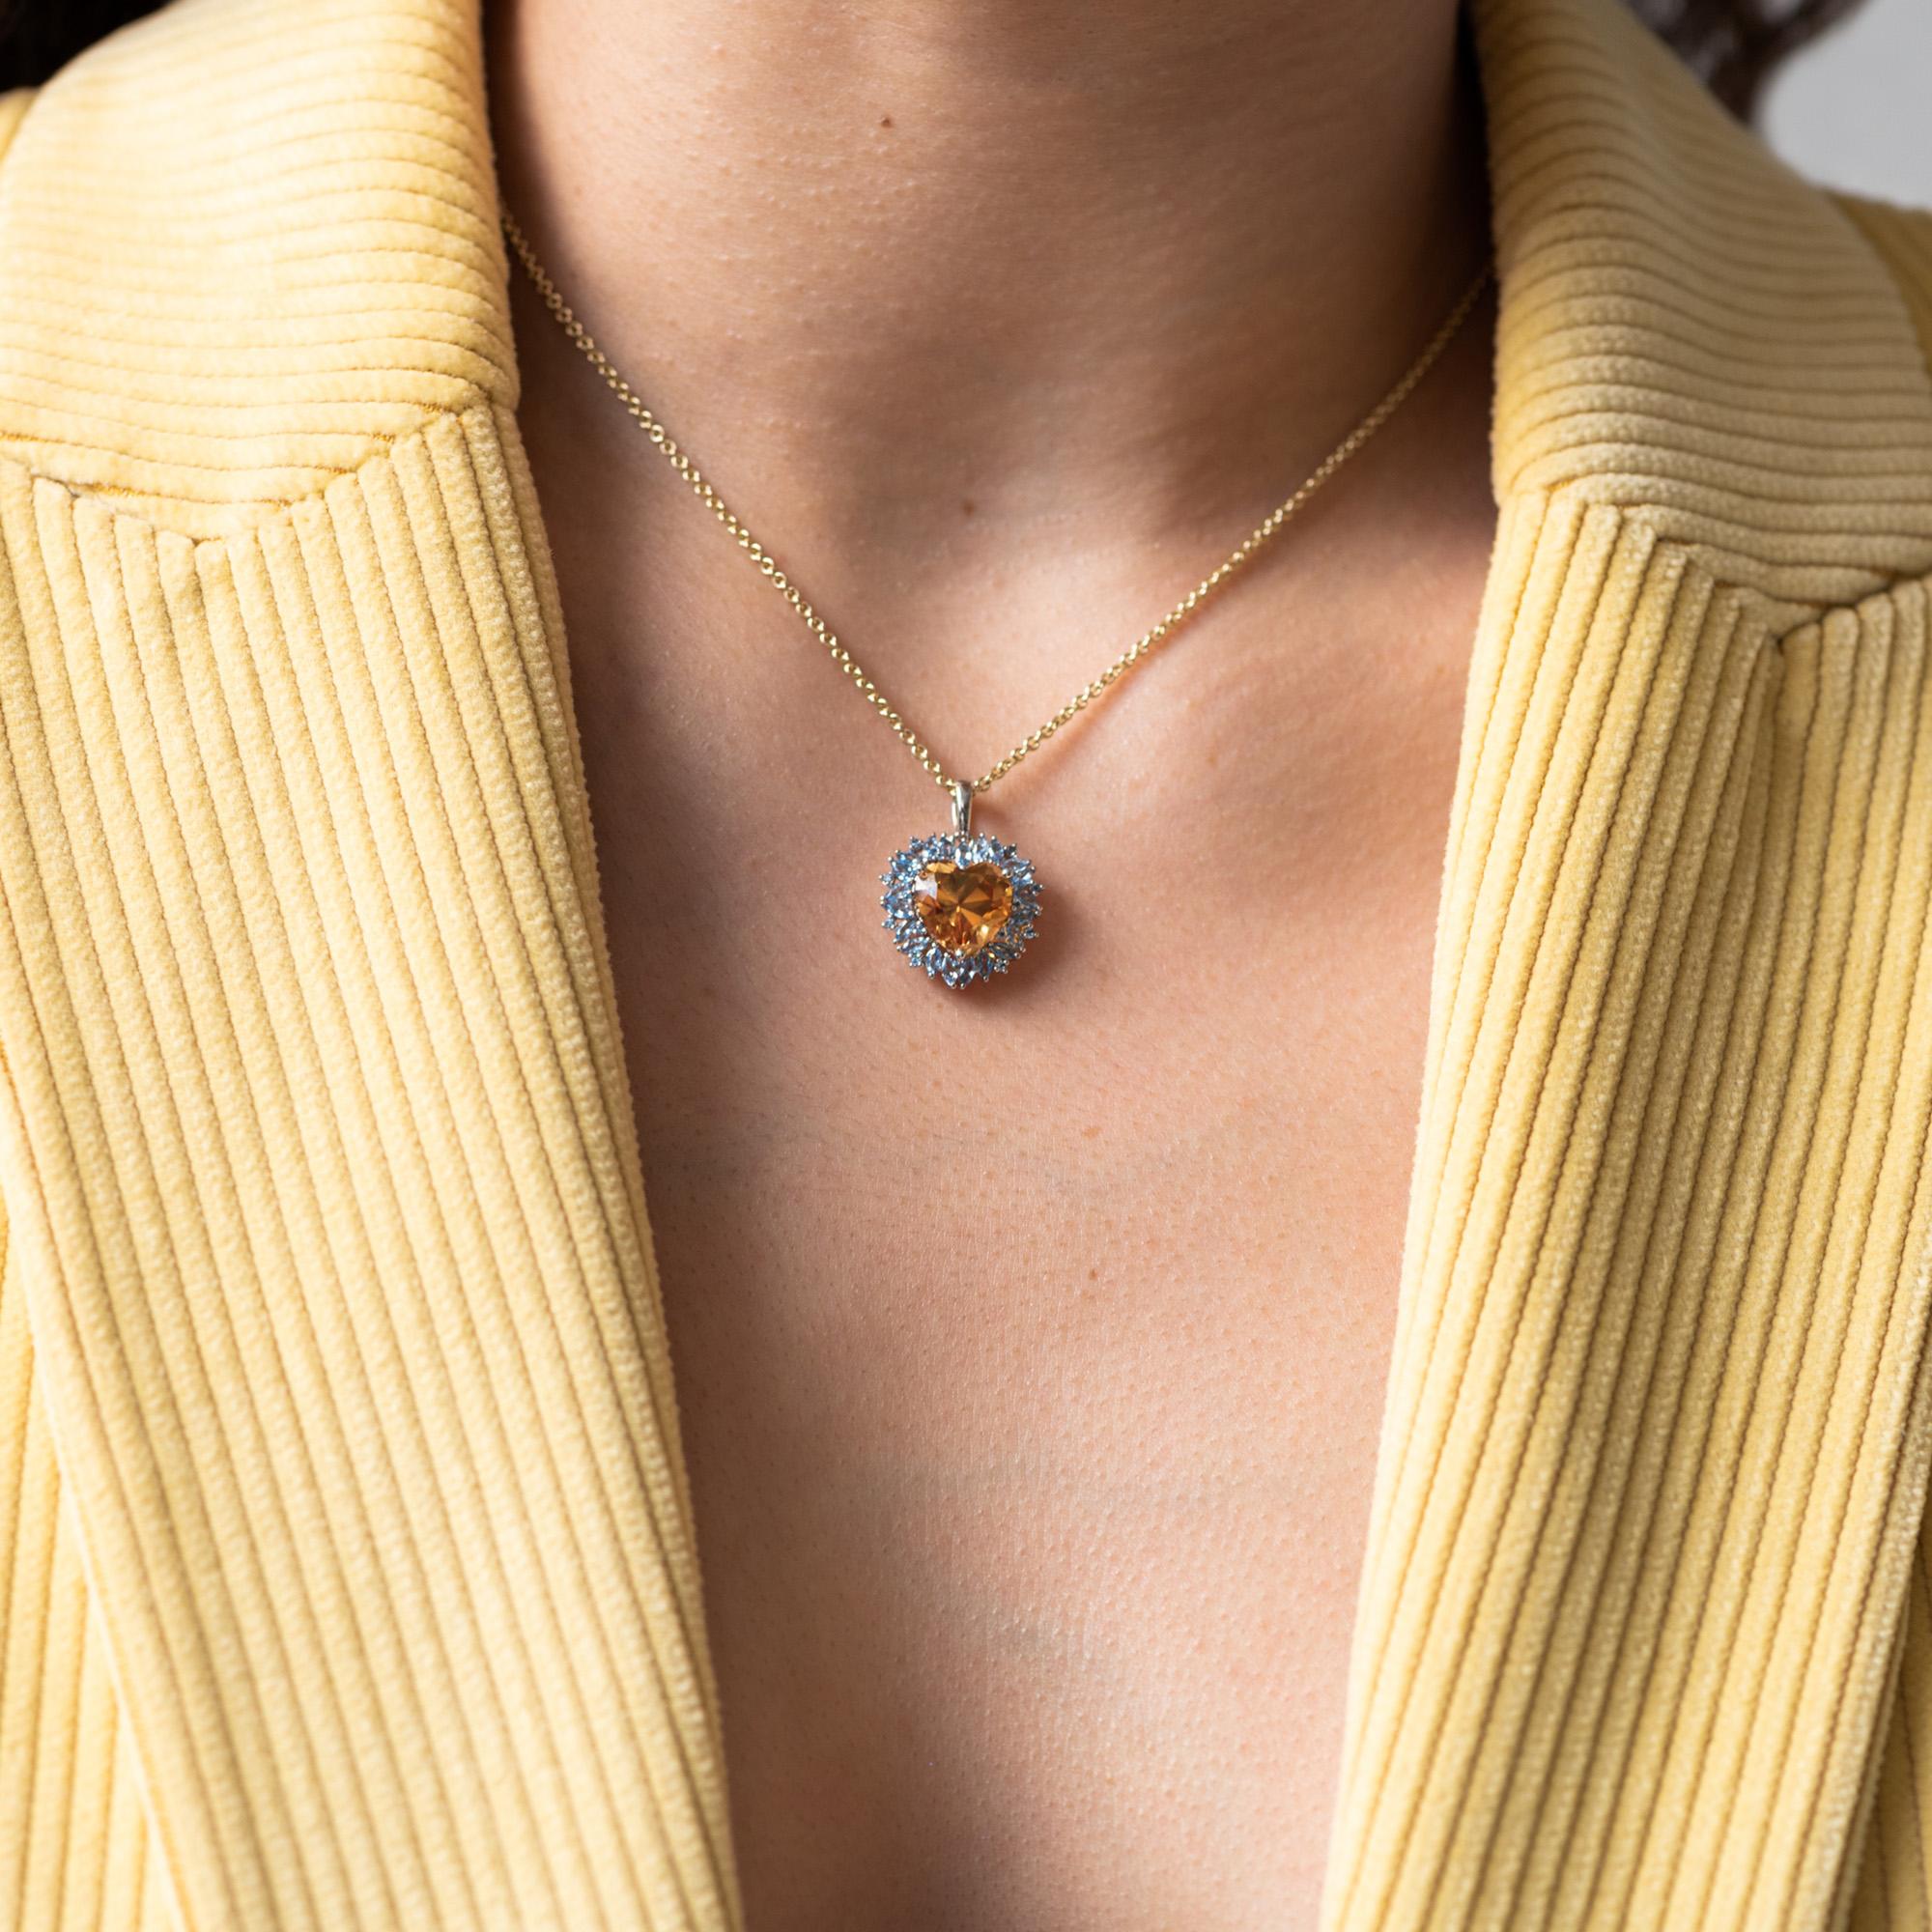 A classic symbol of love, the heart is the centre of our emotions. Our inspiration for the beating heart pendant draws on tumultuous, passionate relationships.

A beautiful large yellow sapphire in the centre brings us harmony, better communication,